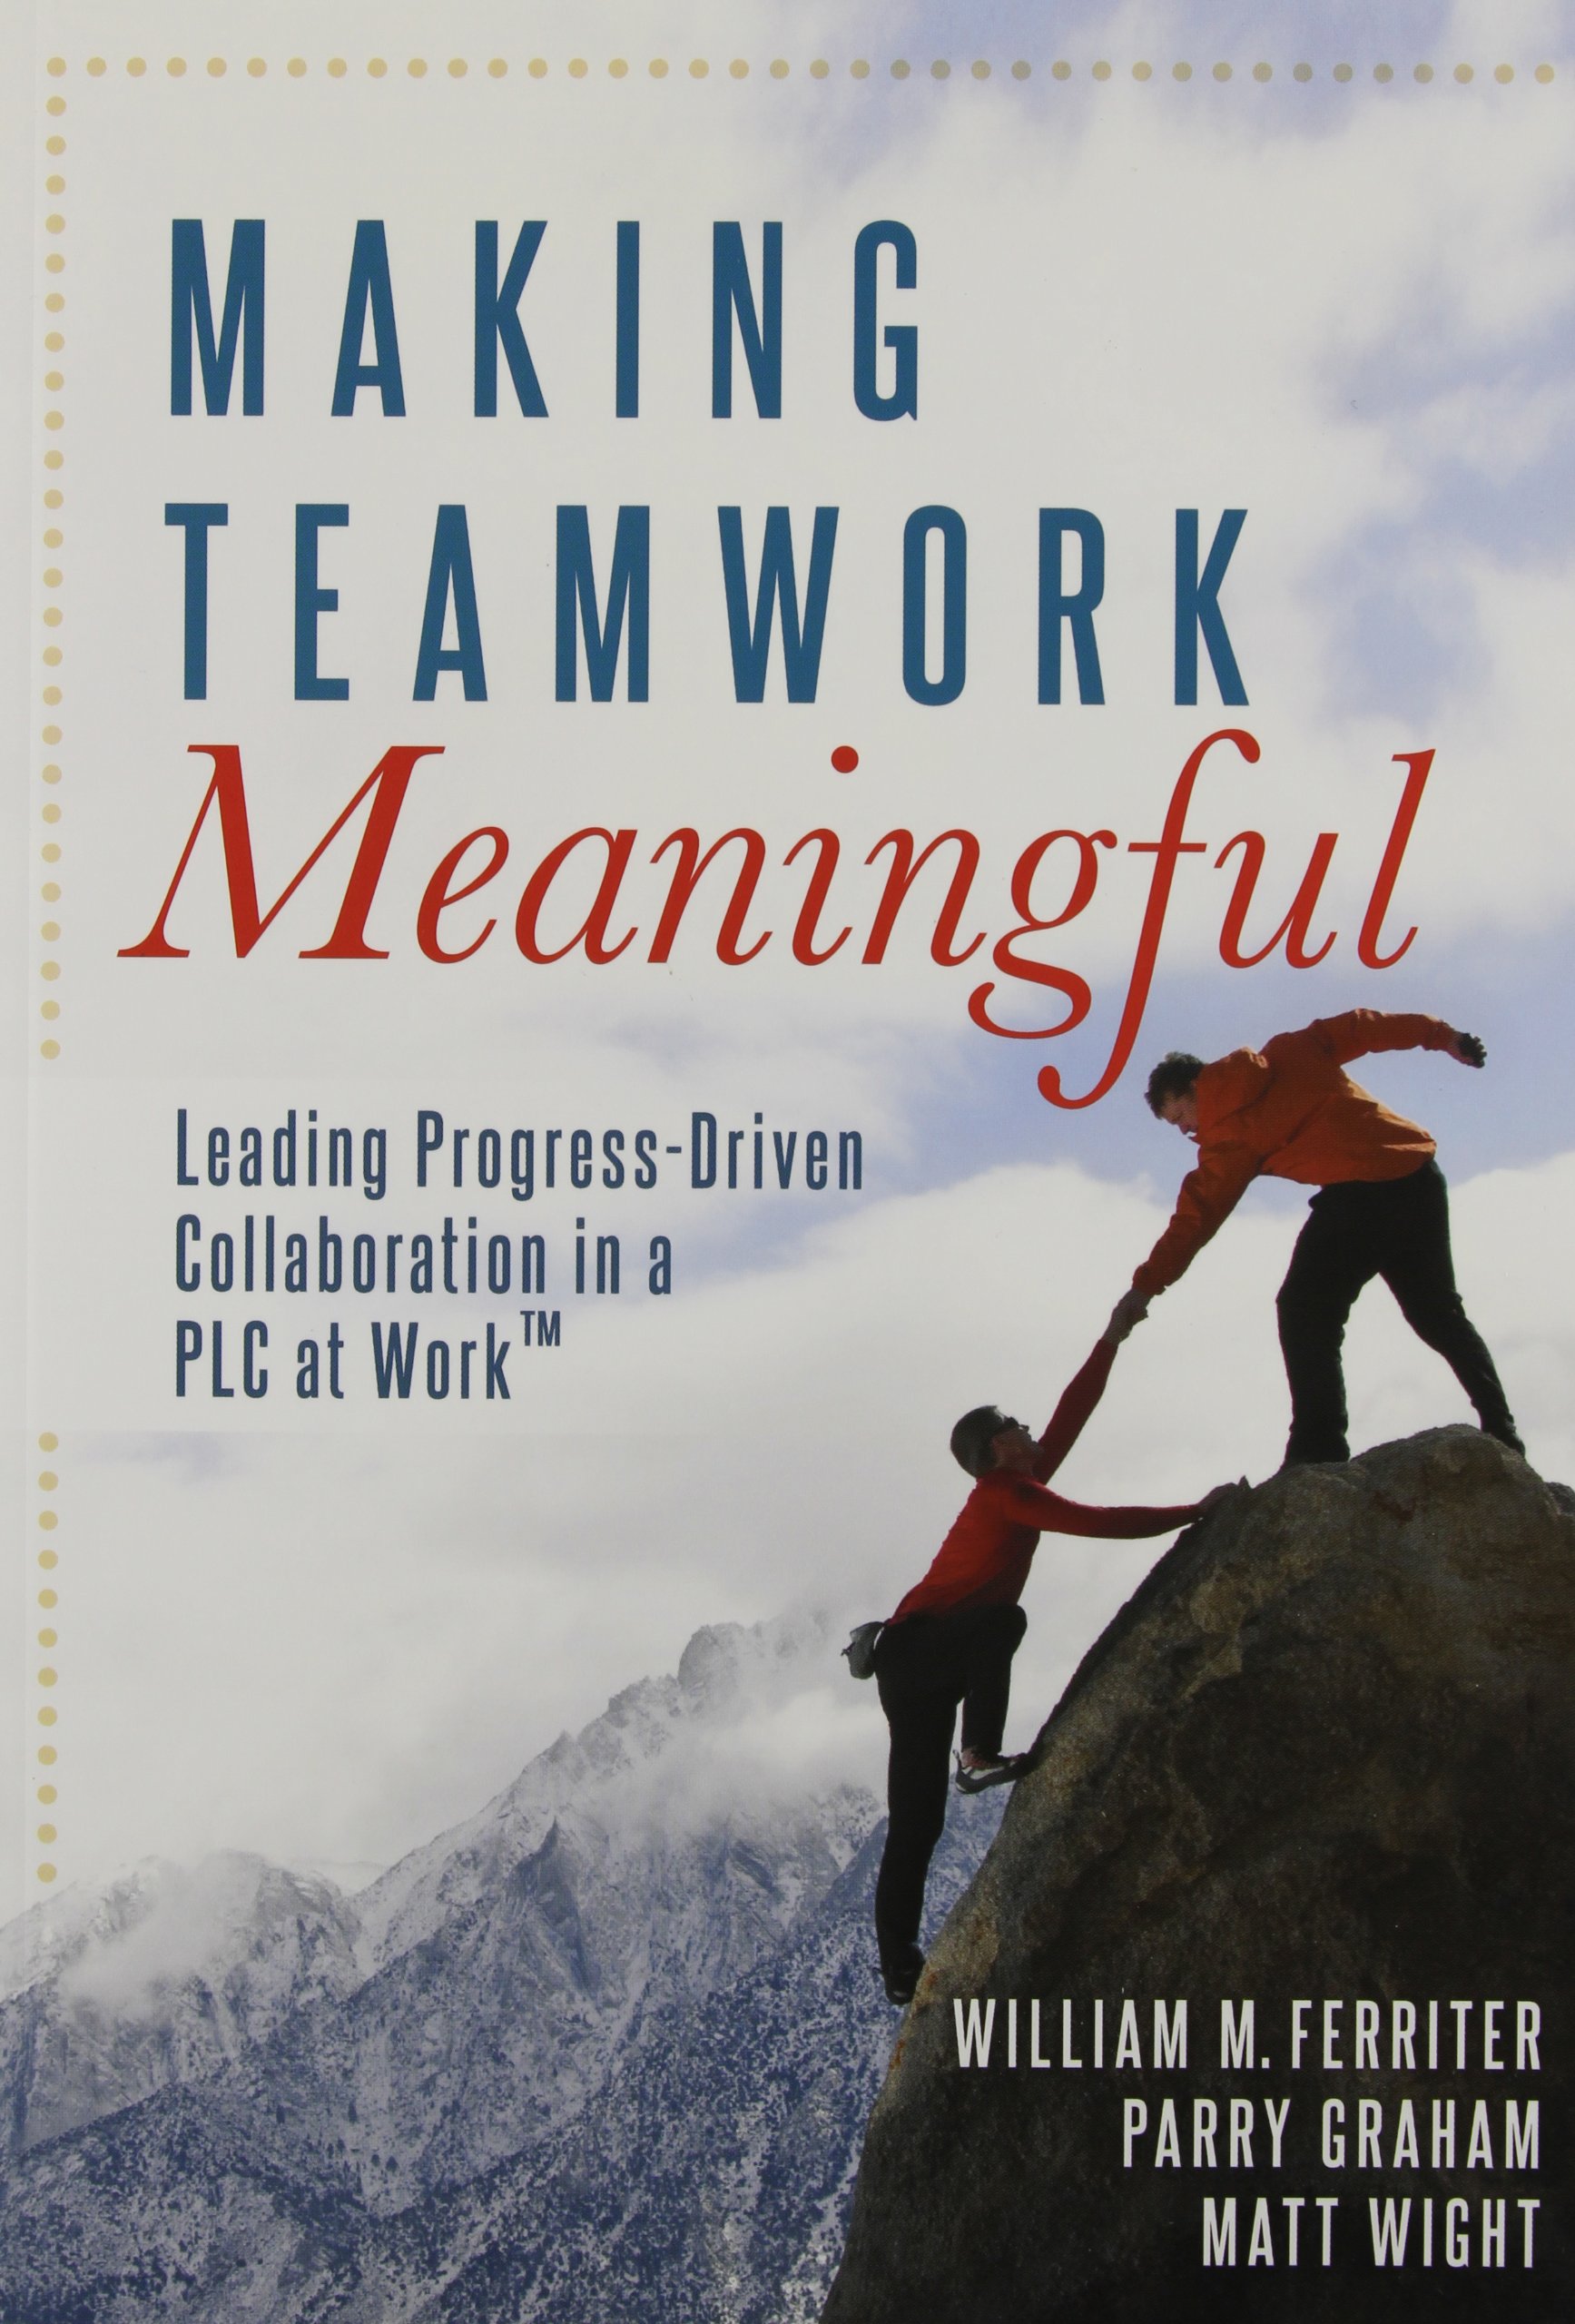 MAKING TEAMWORK MEANINGFUL: LEADING PROGRESS-DRIVEN COLLABORATION IN A PLC